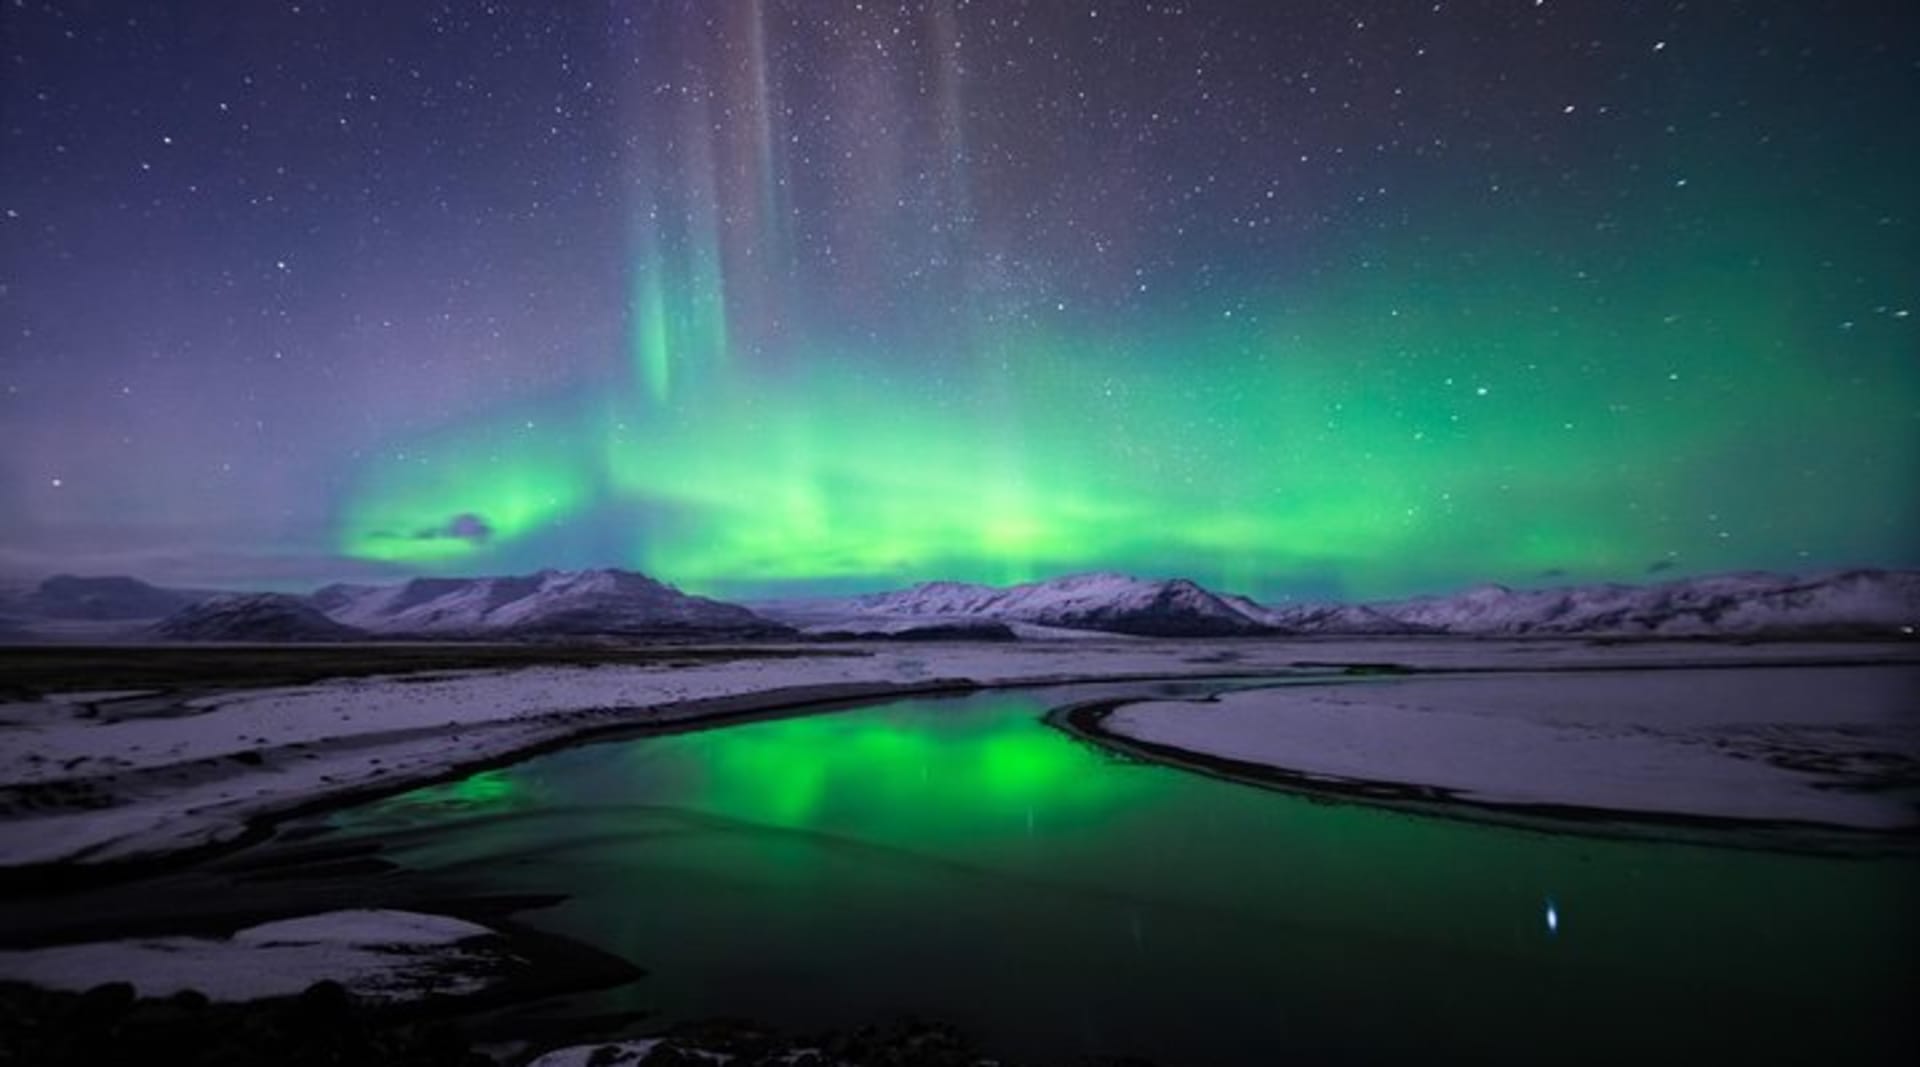 The spectacular show of the Northern Lights over a snow-covered Icelandic landscape